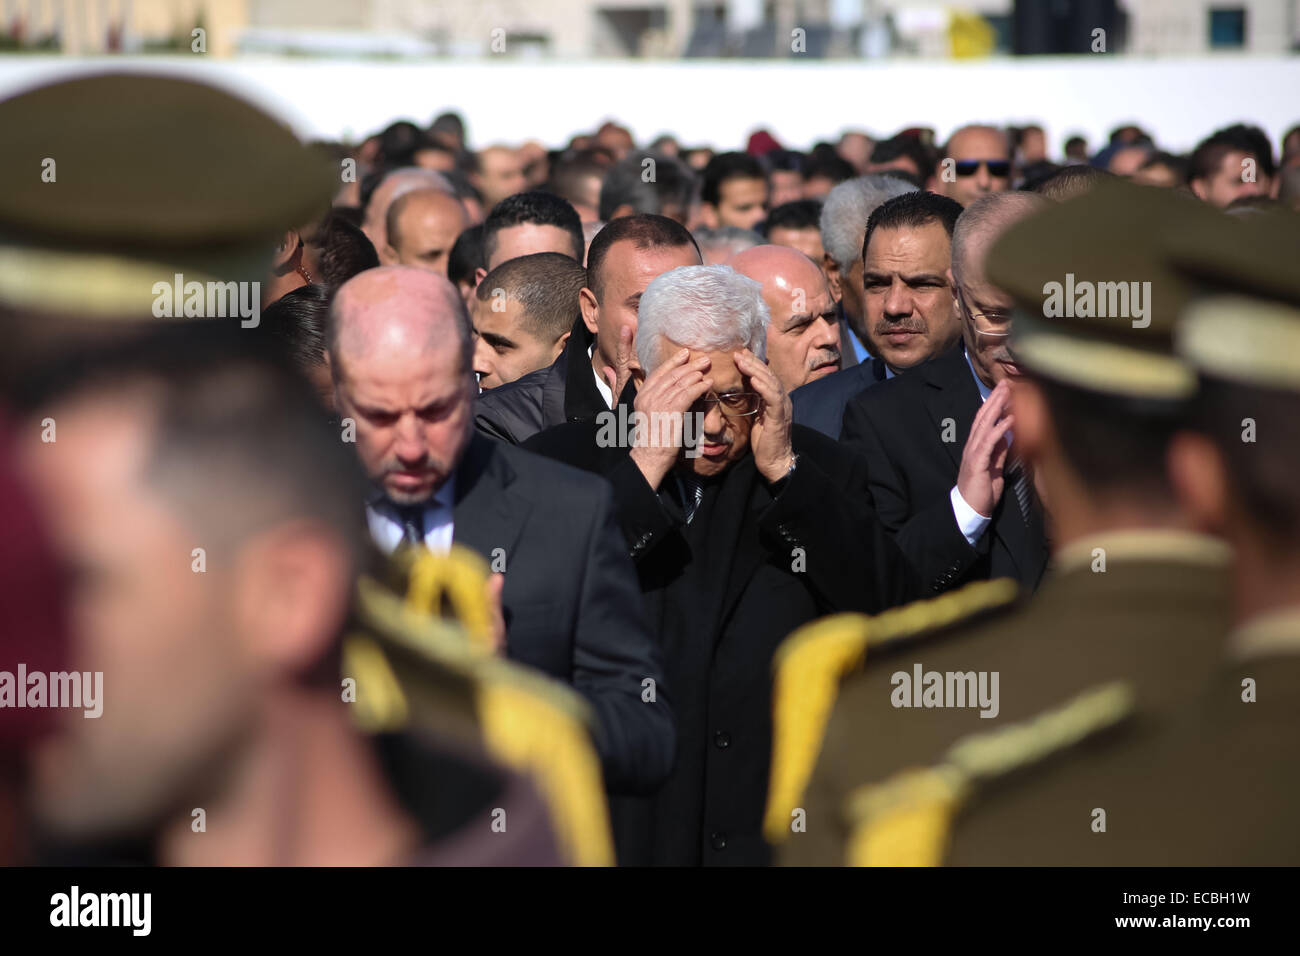 (141211) -- RAMALLAH, Dec. 11, 2014 (Xinhua) -- Palestinian President Mahmoud Abbas, center, attends the funeral procession of the late Palestinian cabinet member Ziad Abu Ain at the Palestinian Authority headquarters in the West Bank city of Ramallah on Dec. 11, 2014. (Xinhua/Fadi Arouri) Stock Photo